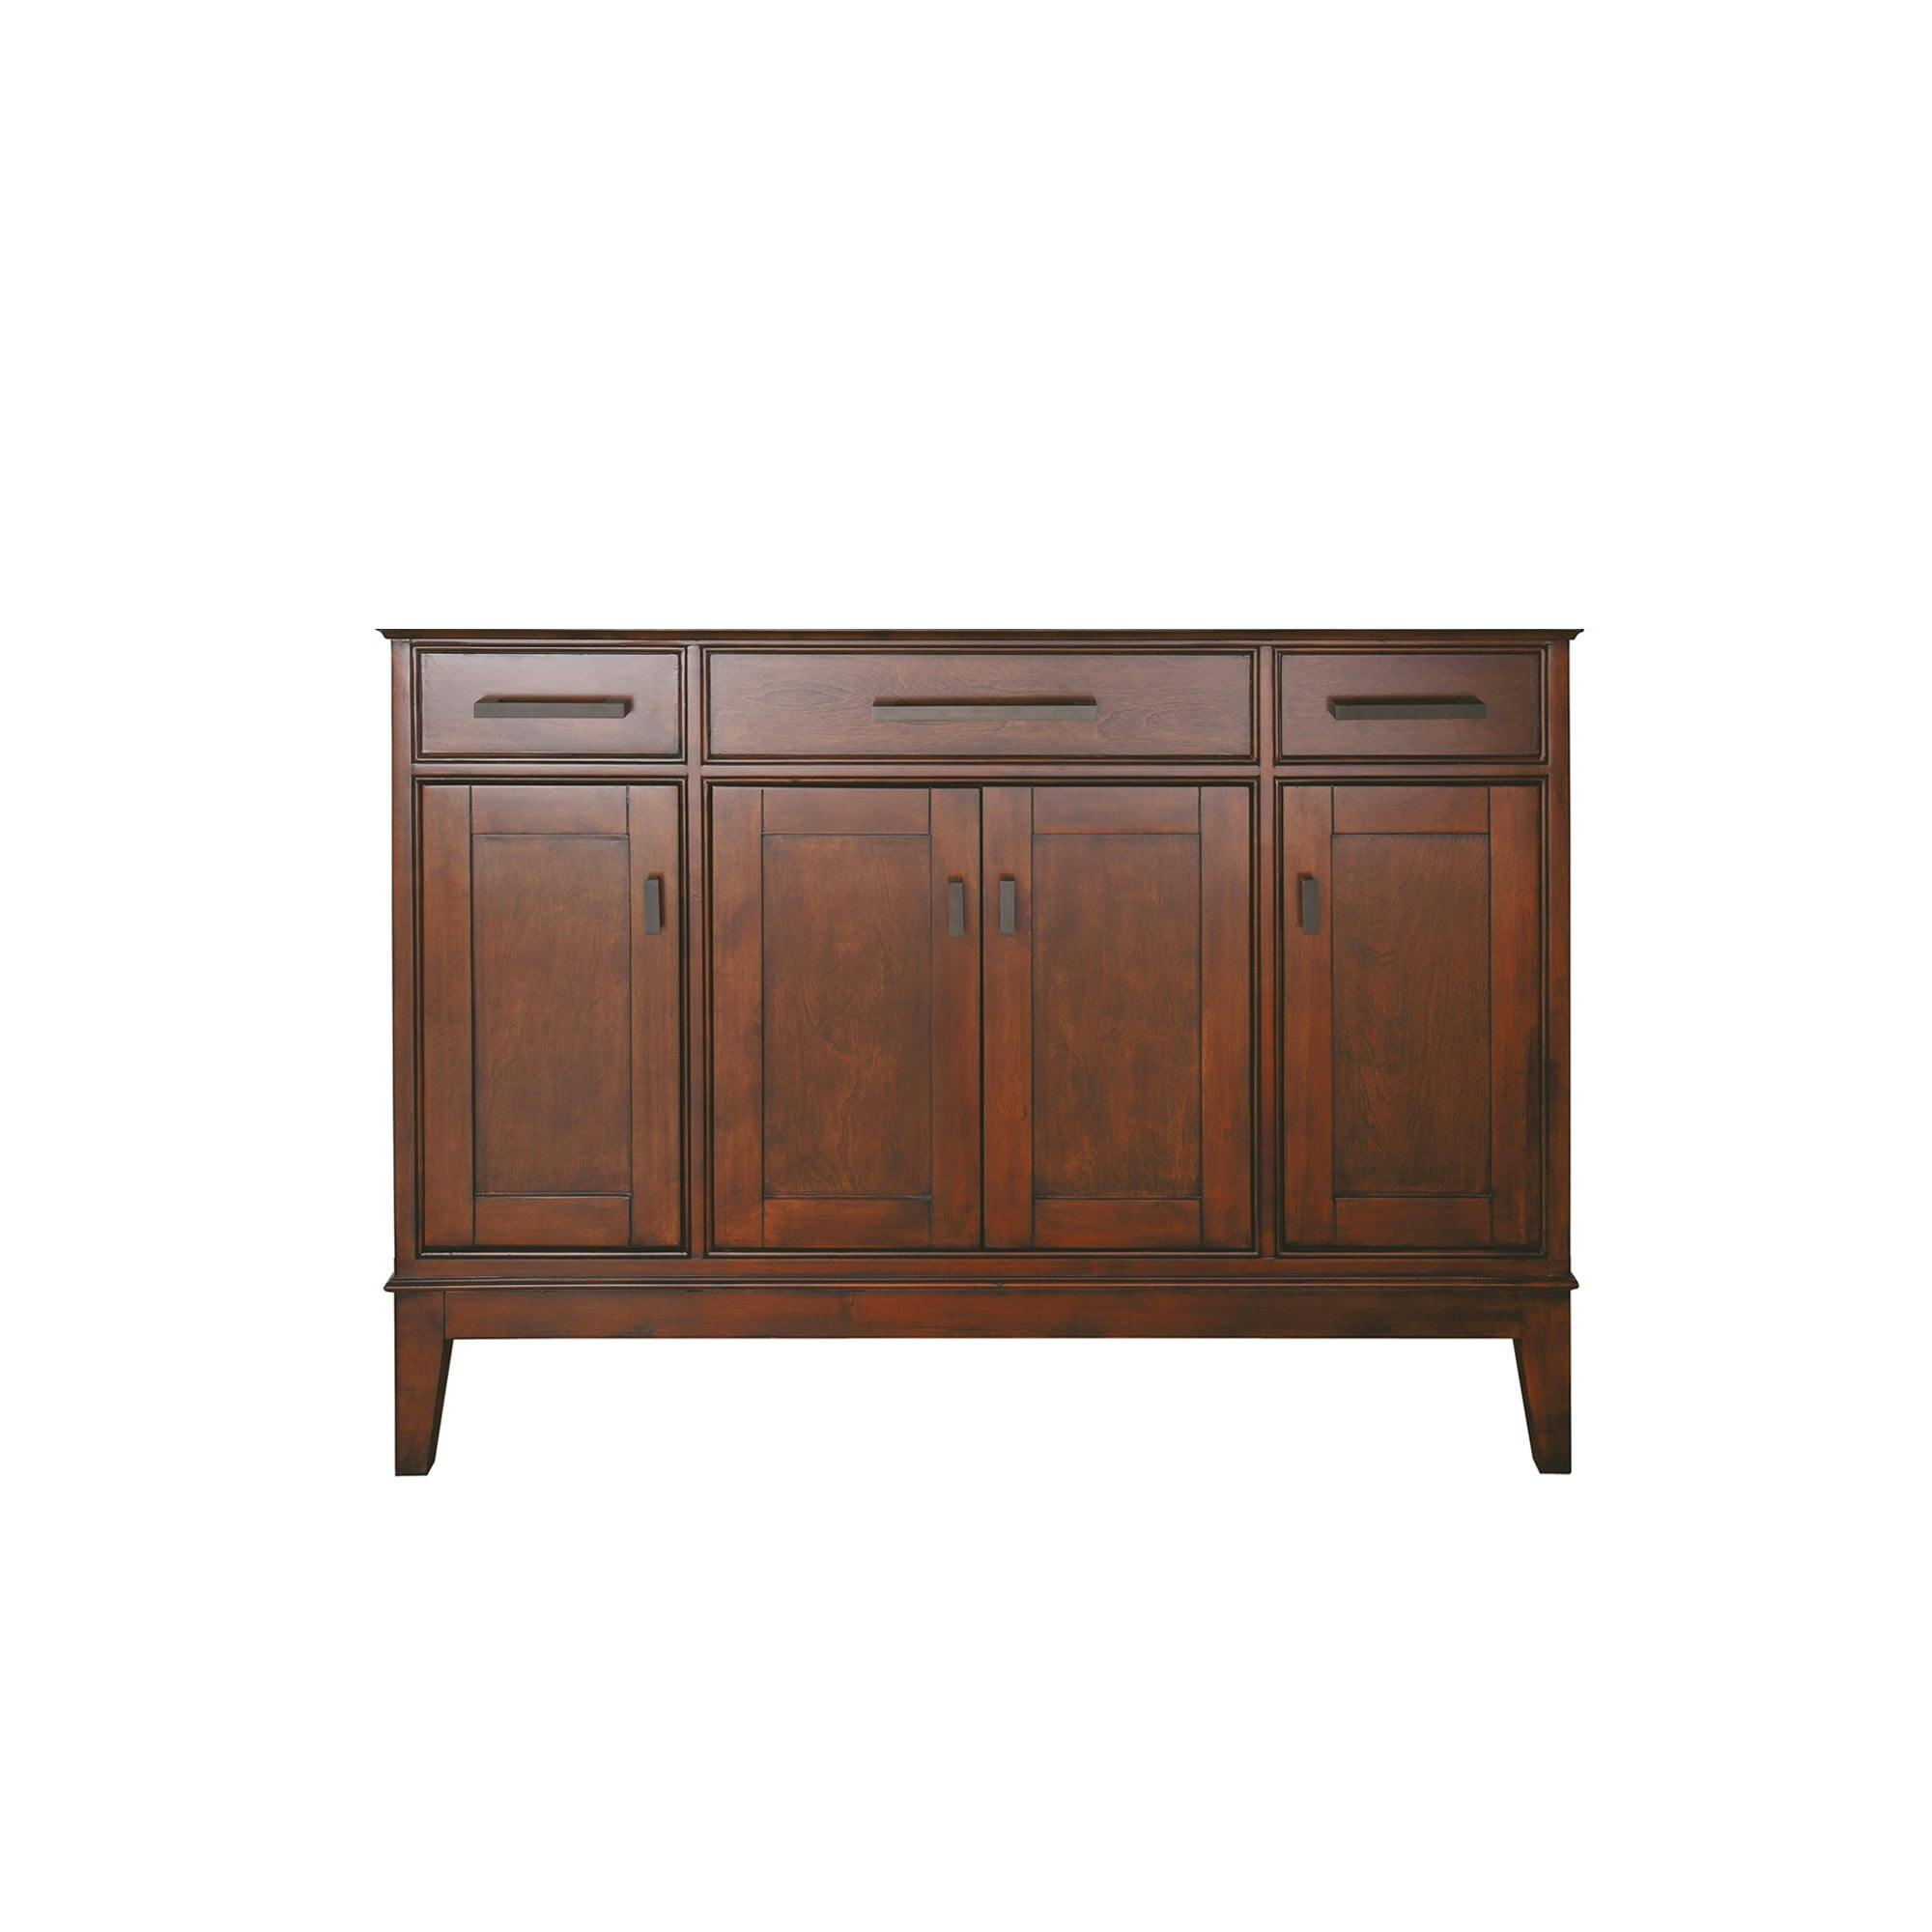 Transitional 48" Solid Wood Freestanding Vanity Base - Tobacco